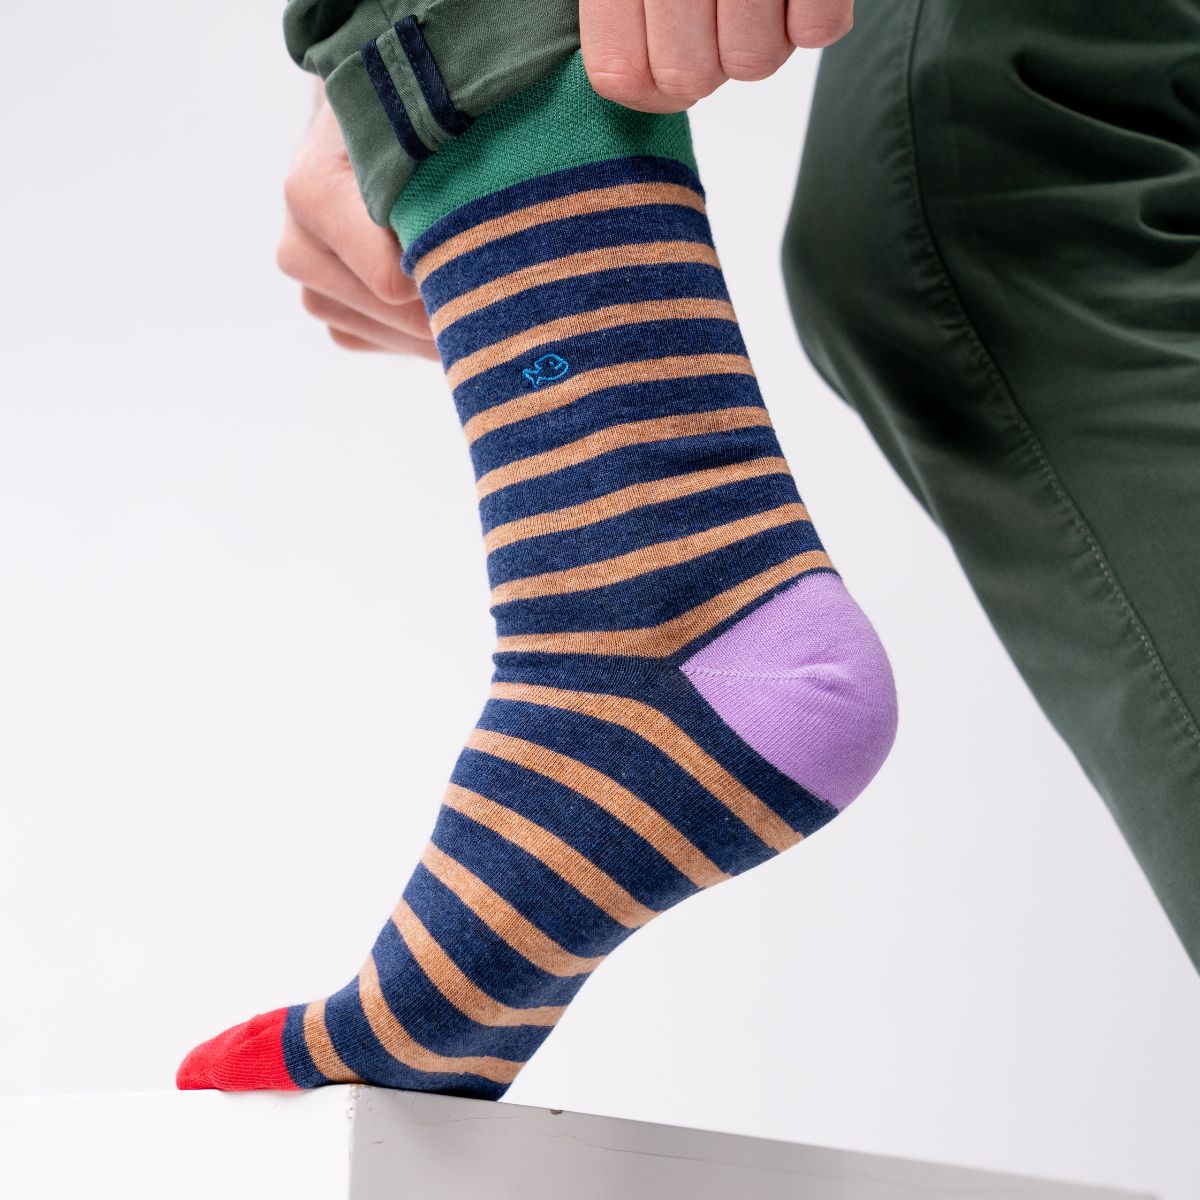 Socks in combed cotton Wide stripes - Navy and beige